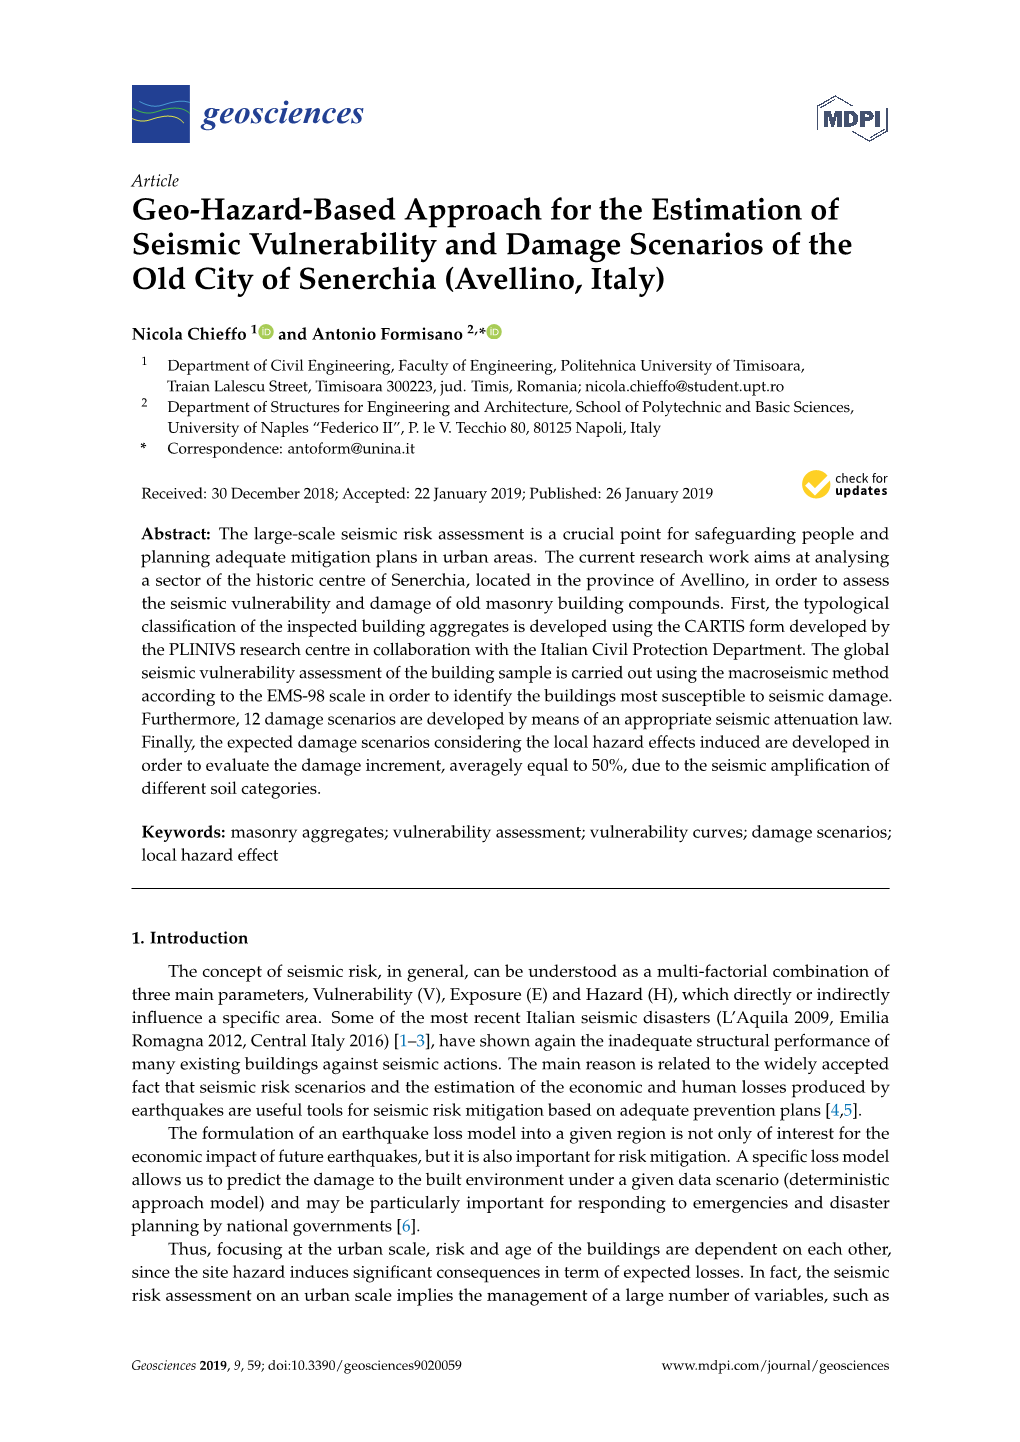 Geo-Hazard-Based Approach for the Estimation of Seismic Vulnerability and Damage Scenarios of the Old City of Senerchia (Avellino, Italy)